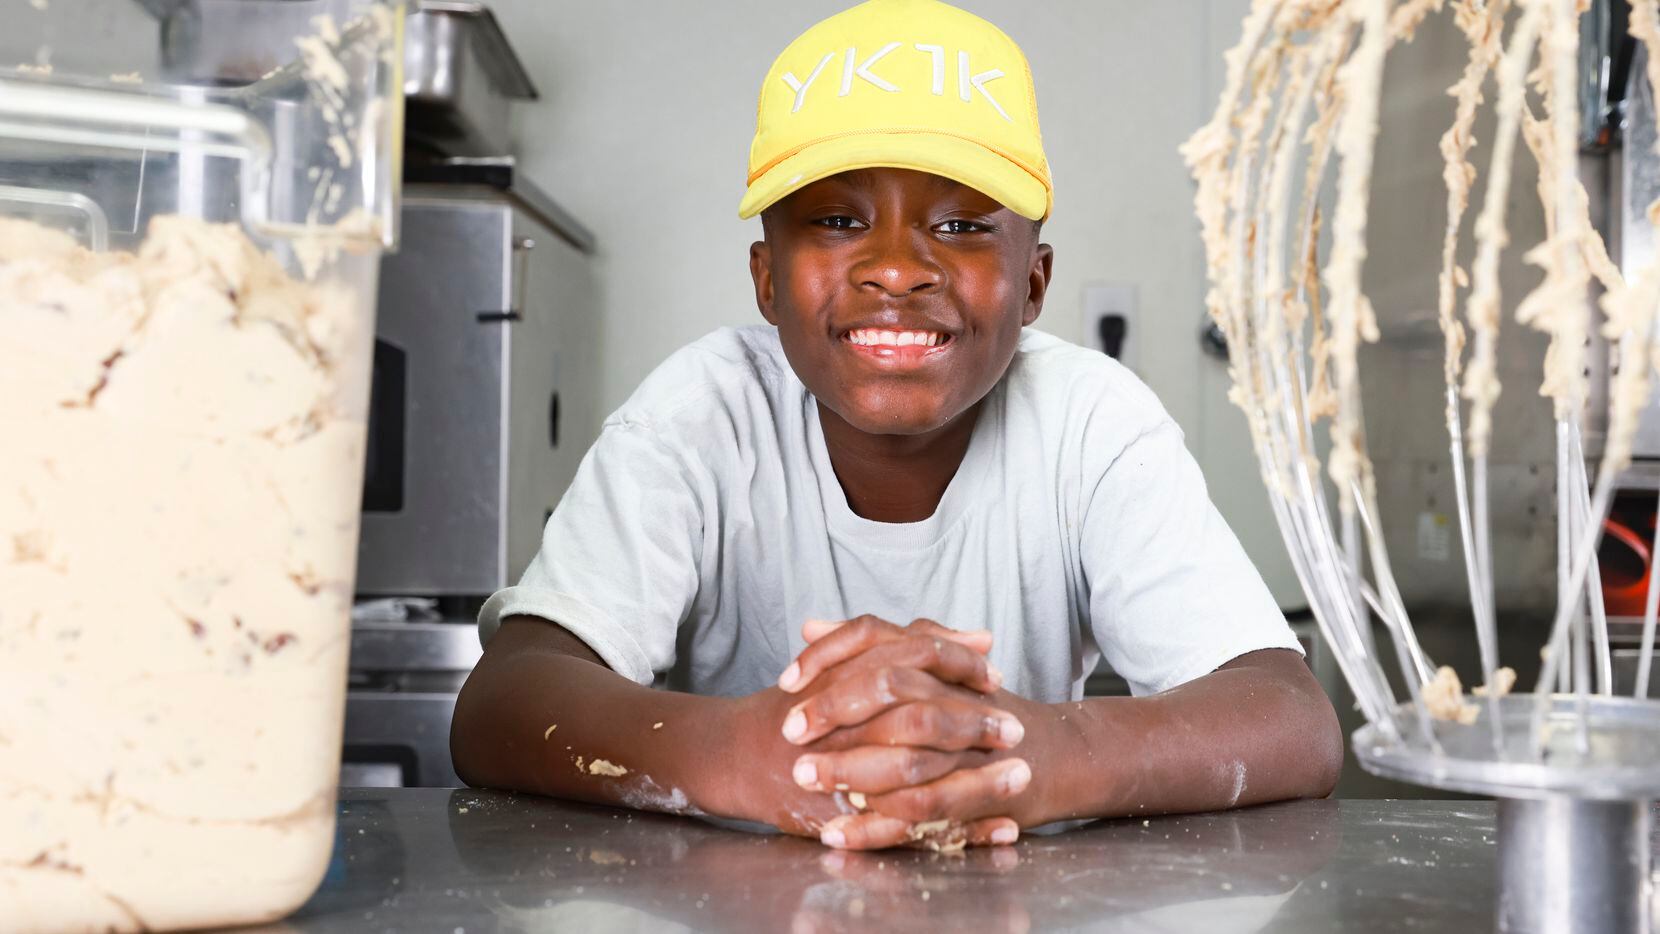 Dallas Wise, 12, after making chocolate chip cookie dough, Friday, Nov. 18, 2022, in Dallas....